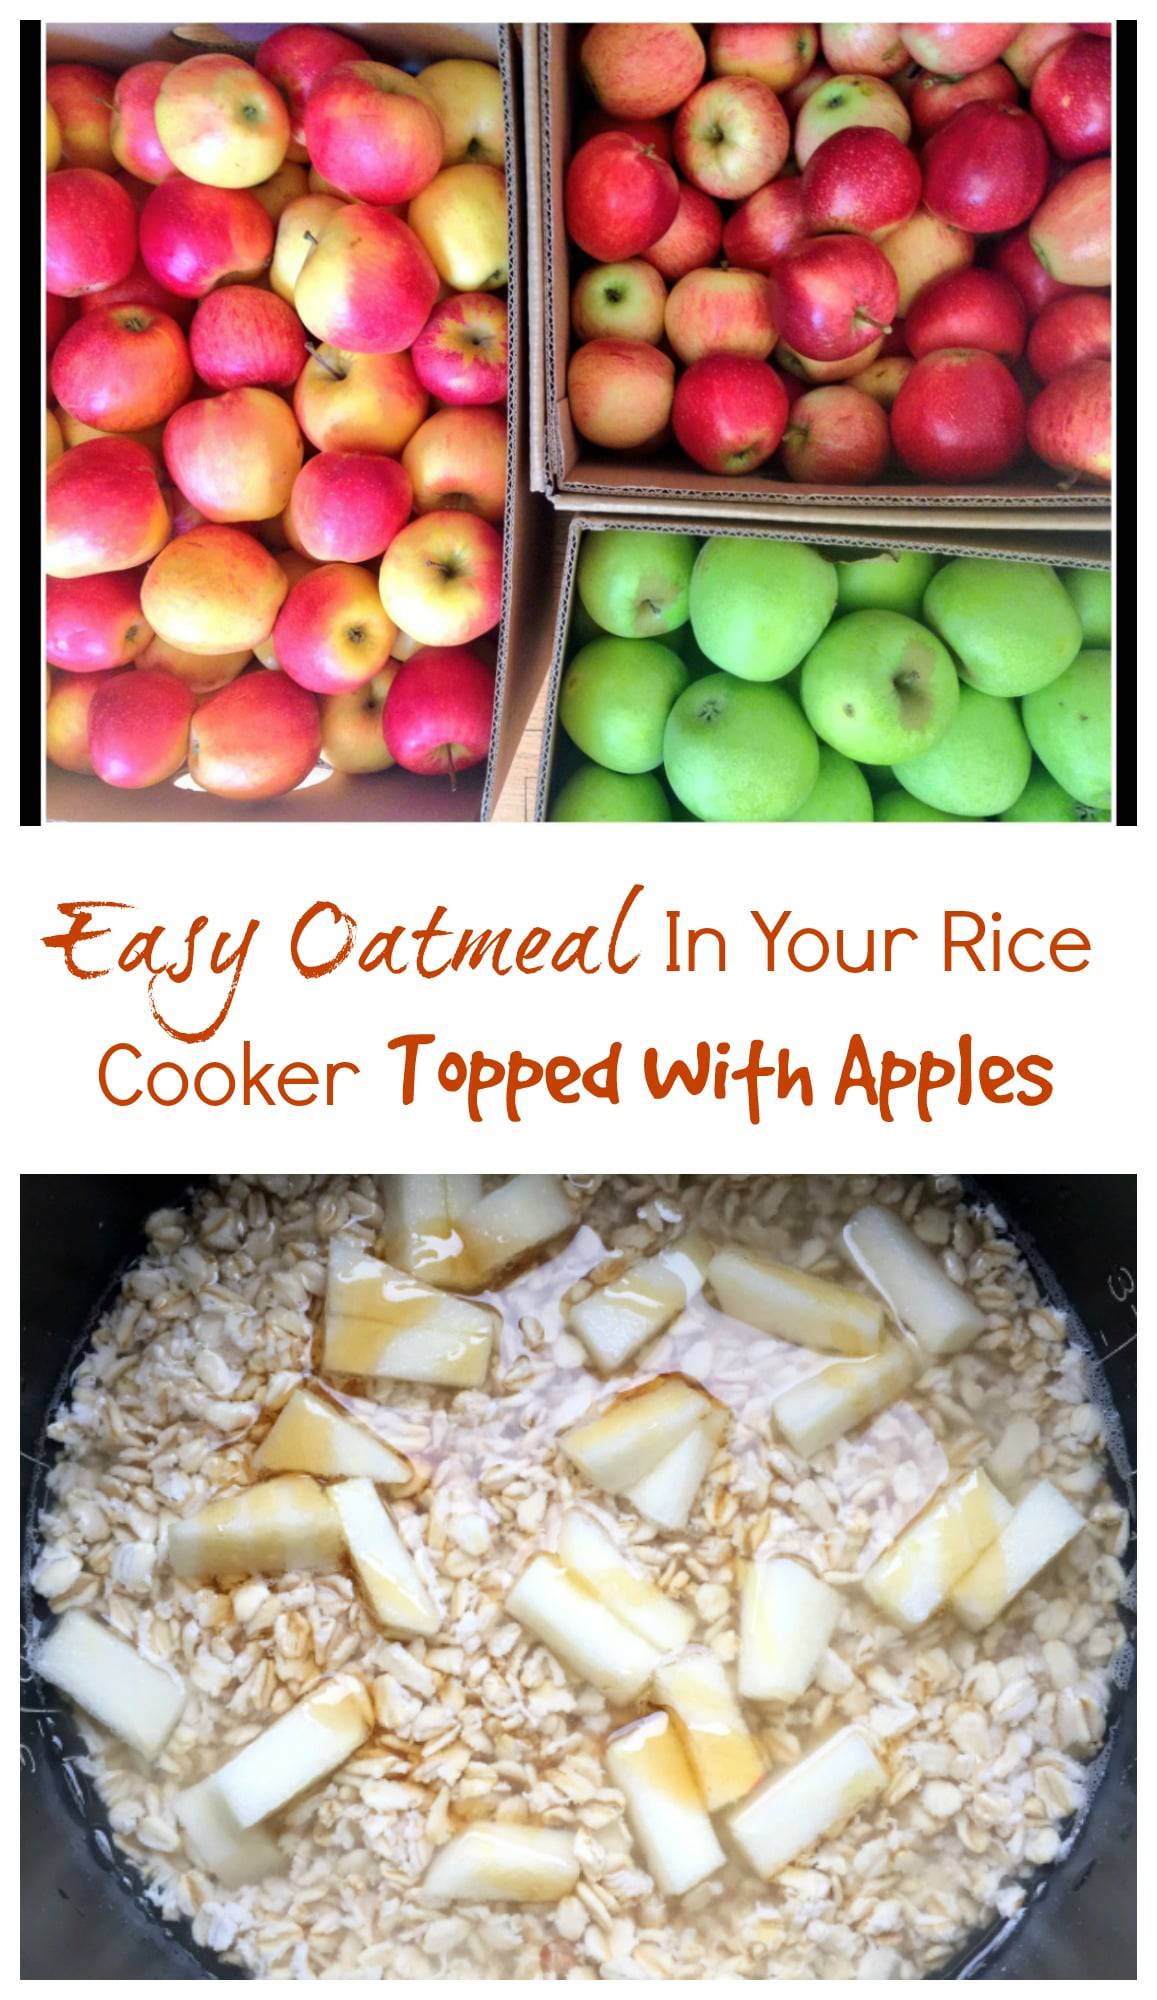 Easy Oatmeal in Your Rice Cooker